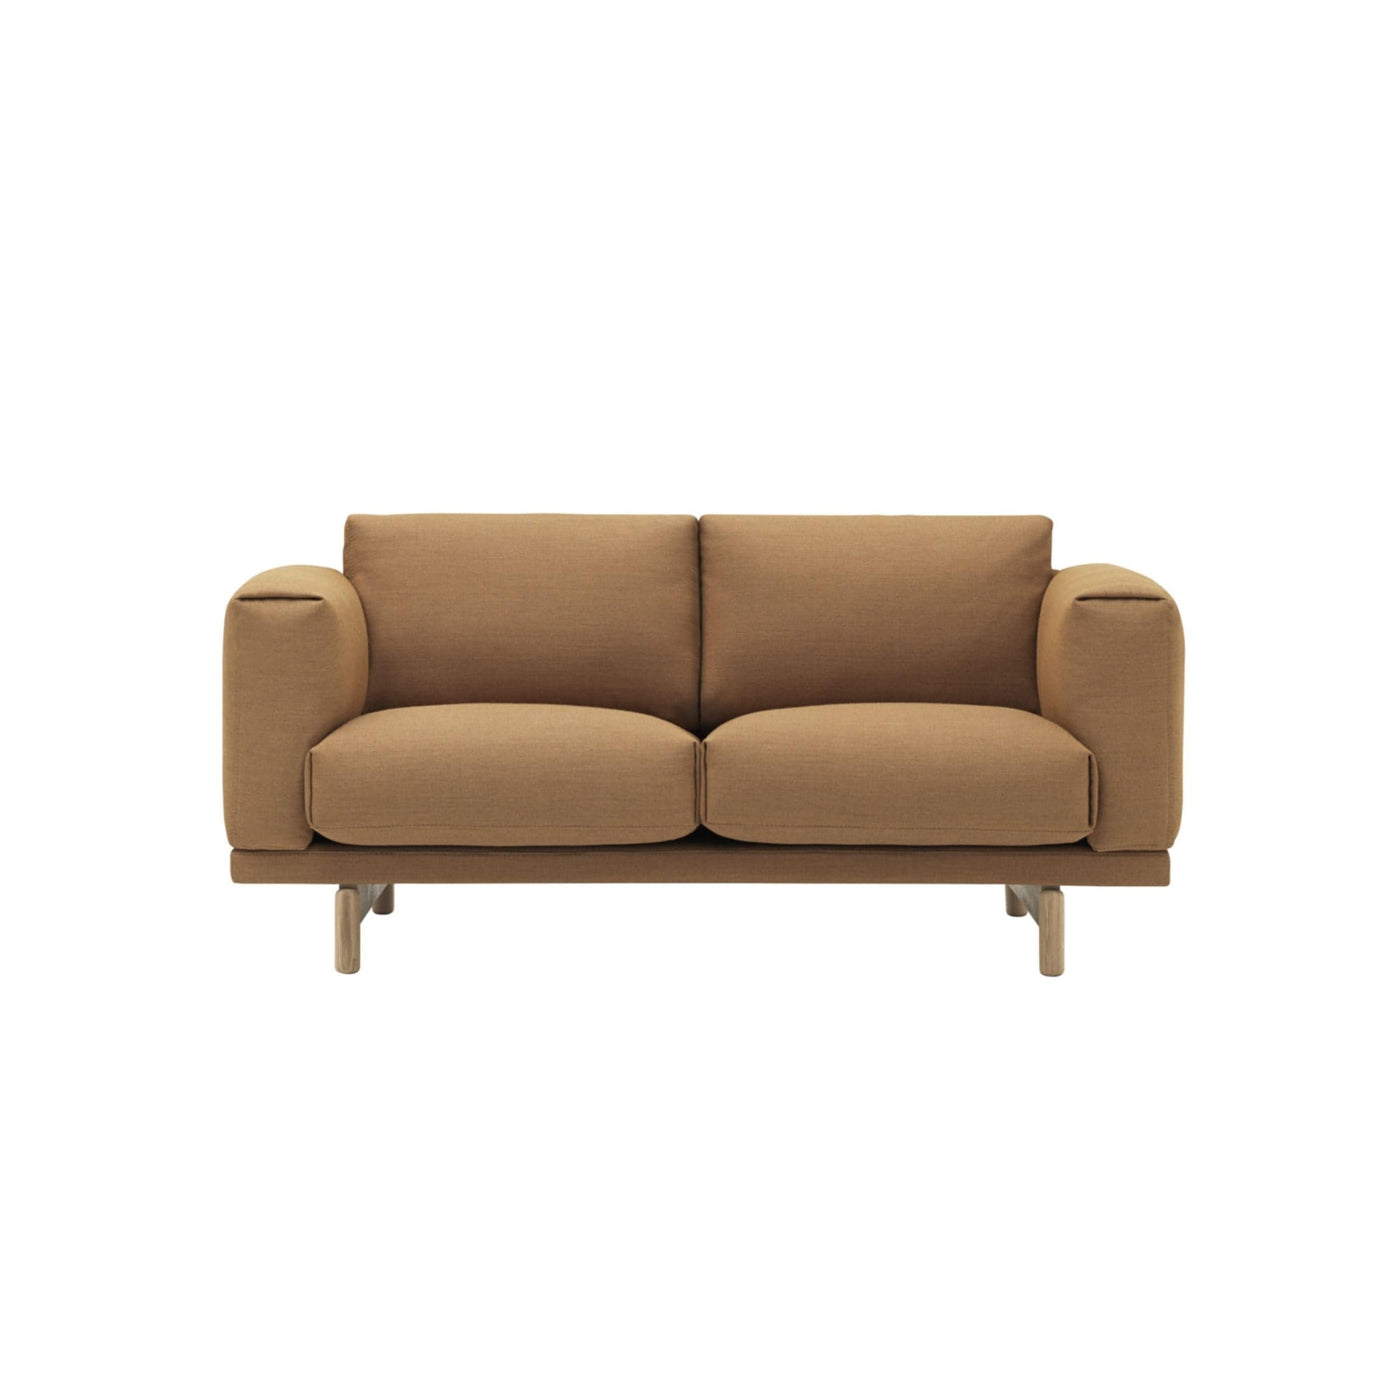 Muuto Rest Studio Sofa, made to order from someday designs. #colour_fiord-451